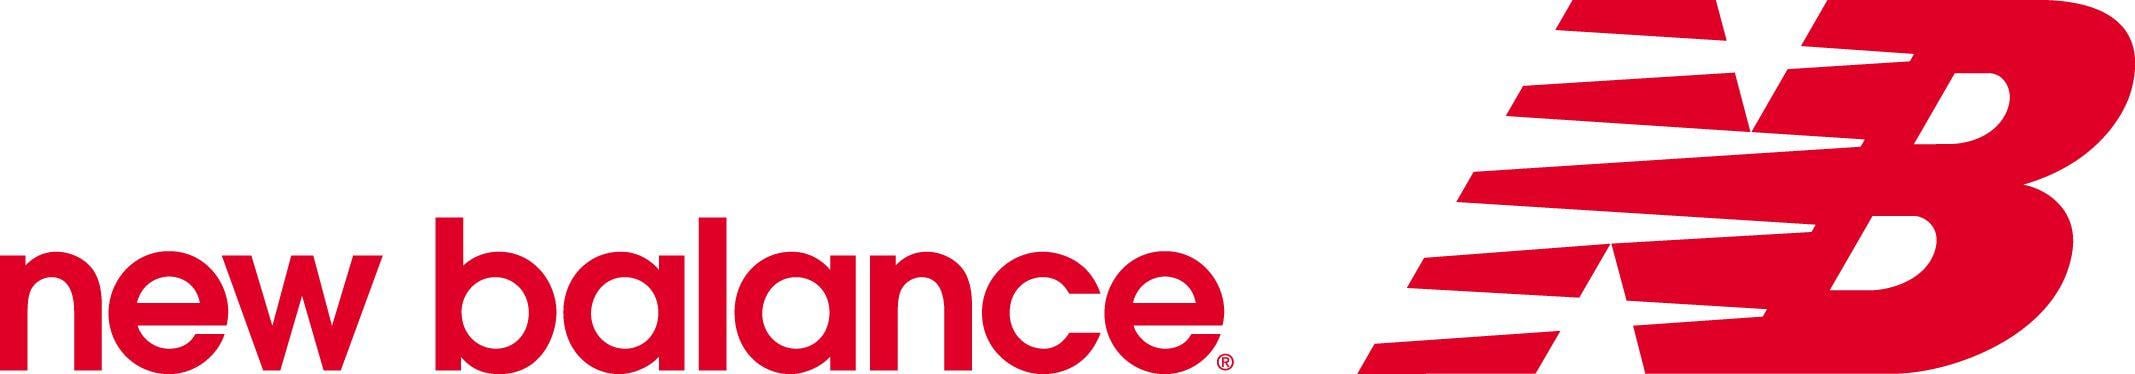 New Balance Logo - New Balance Shoes and Clothing online for men and women. Cheap and ...